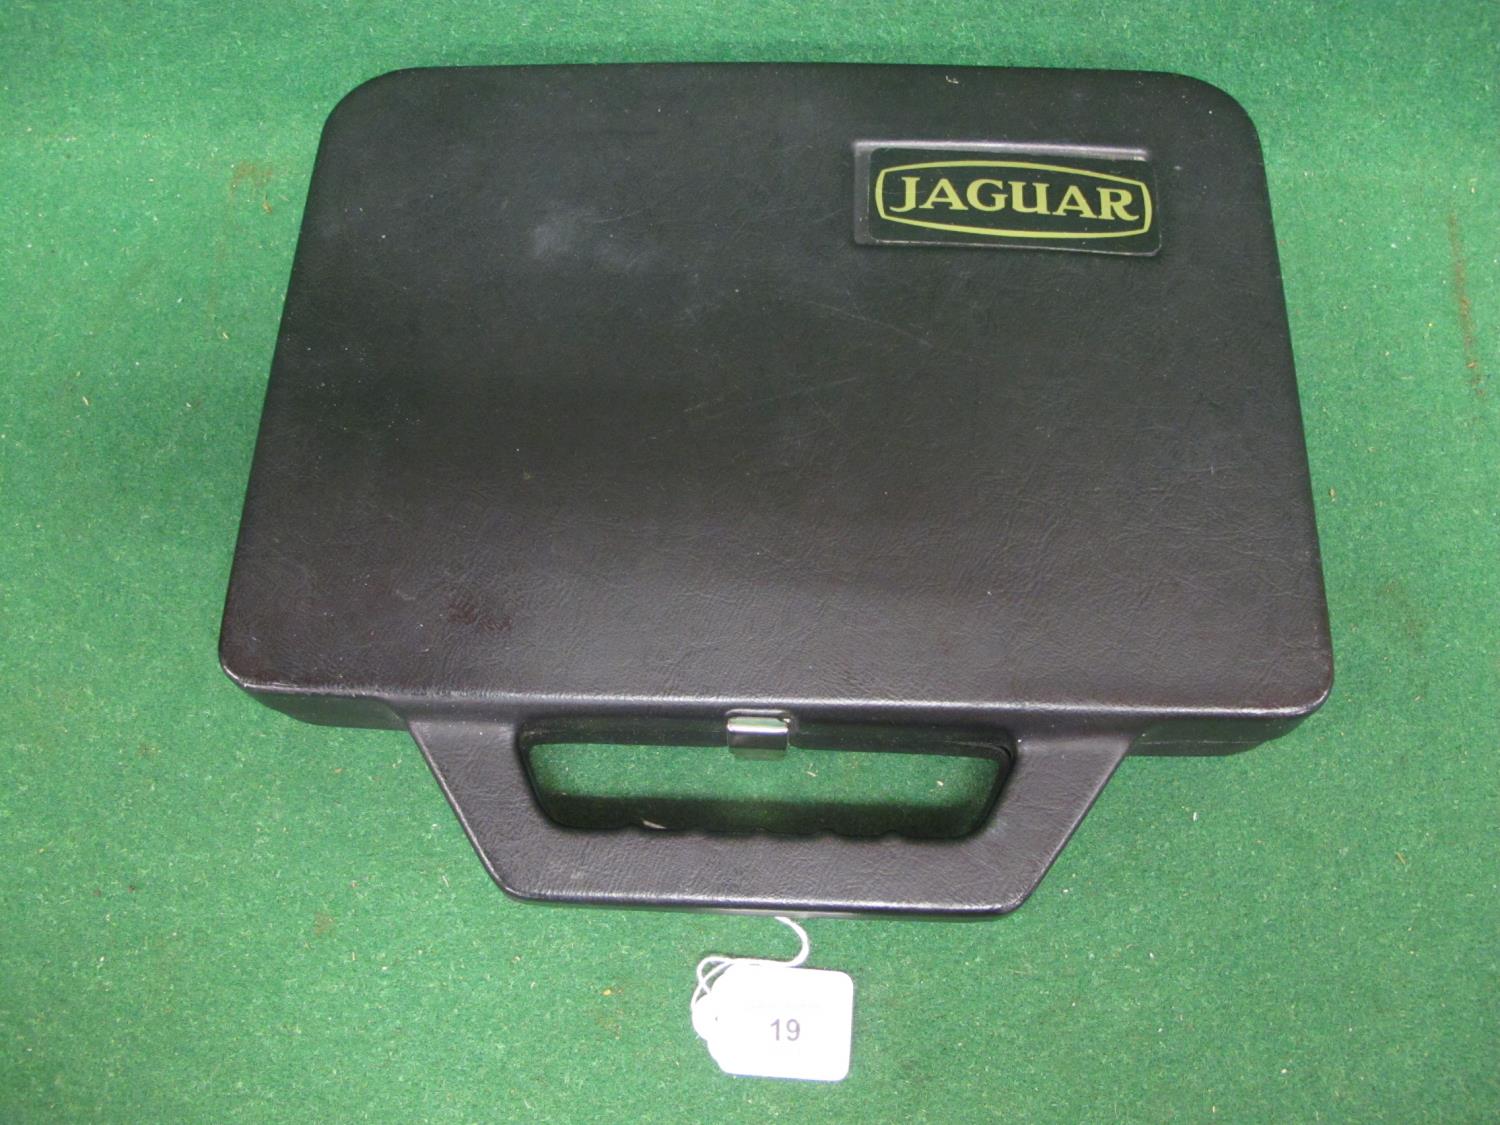 Jaguar cars plastic tool box kit with tools, bulbs and tyre pressure gauge Please note - Image 2 of 3